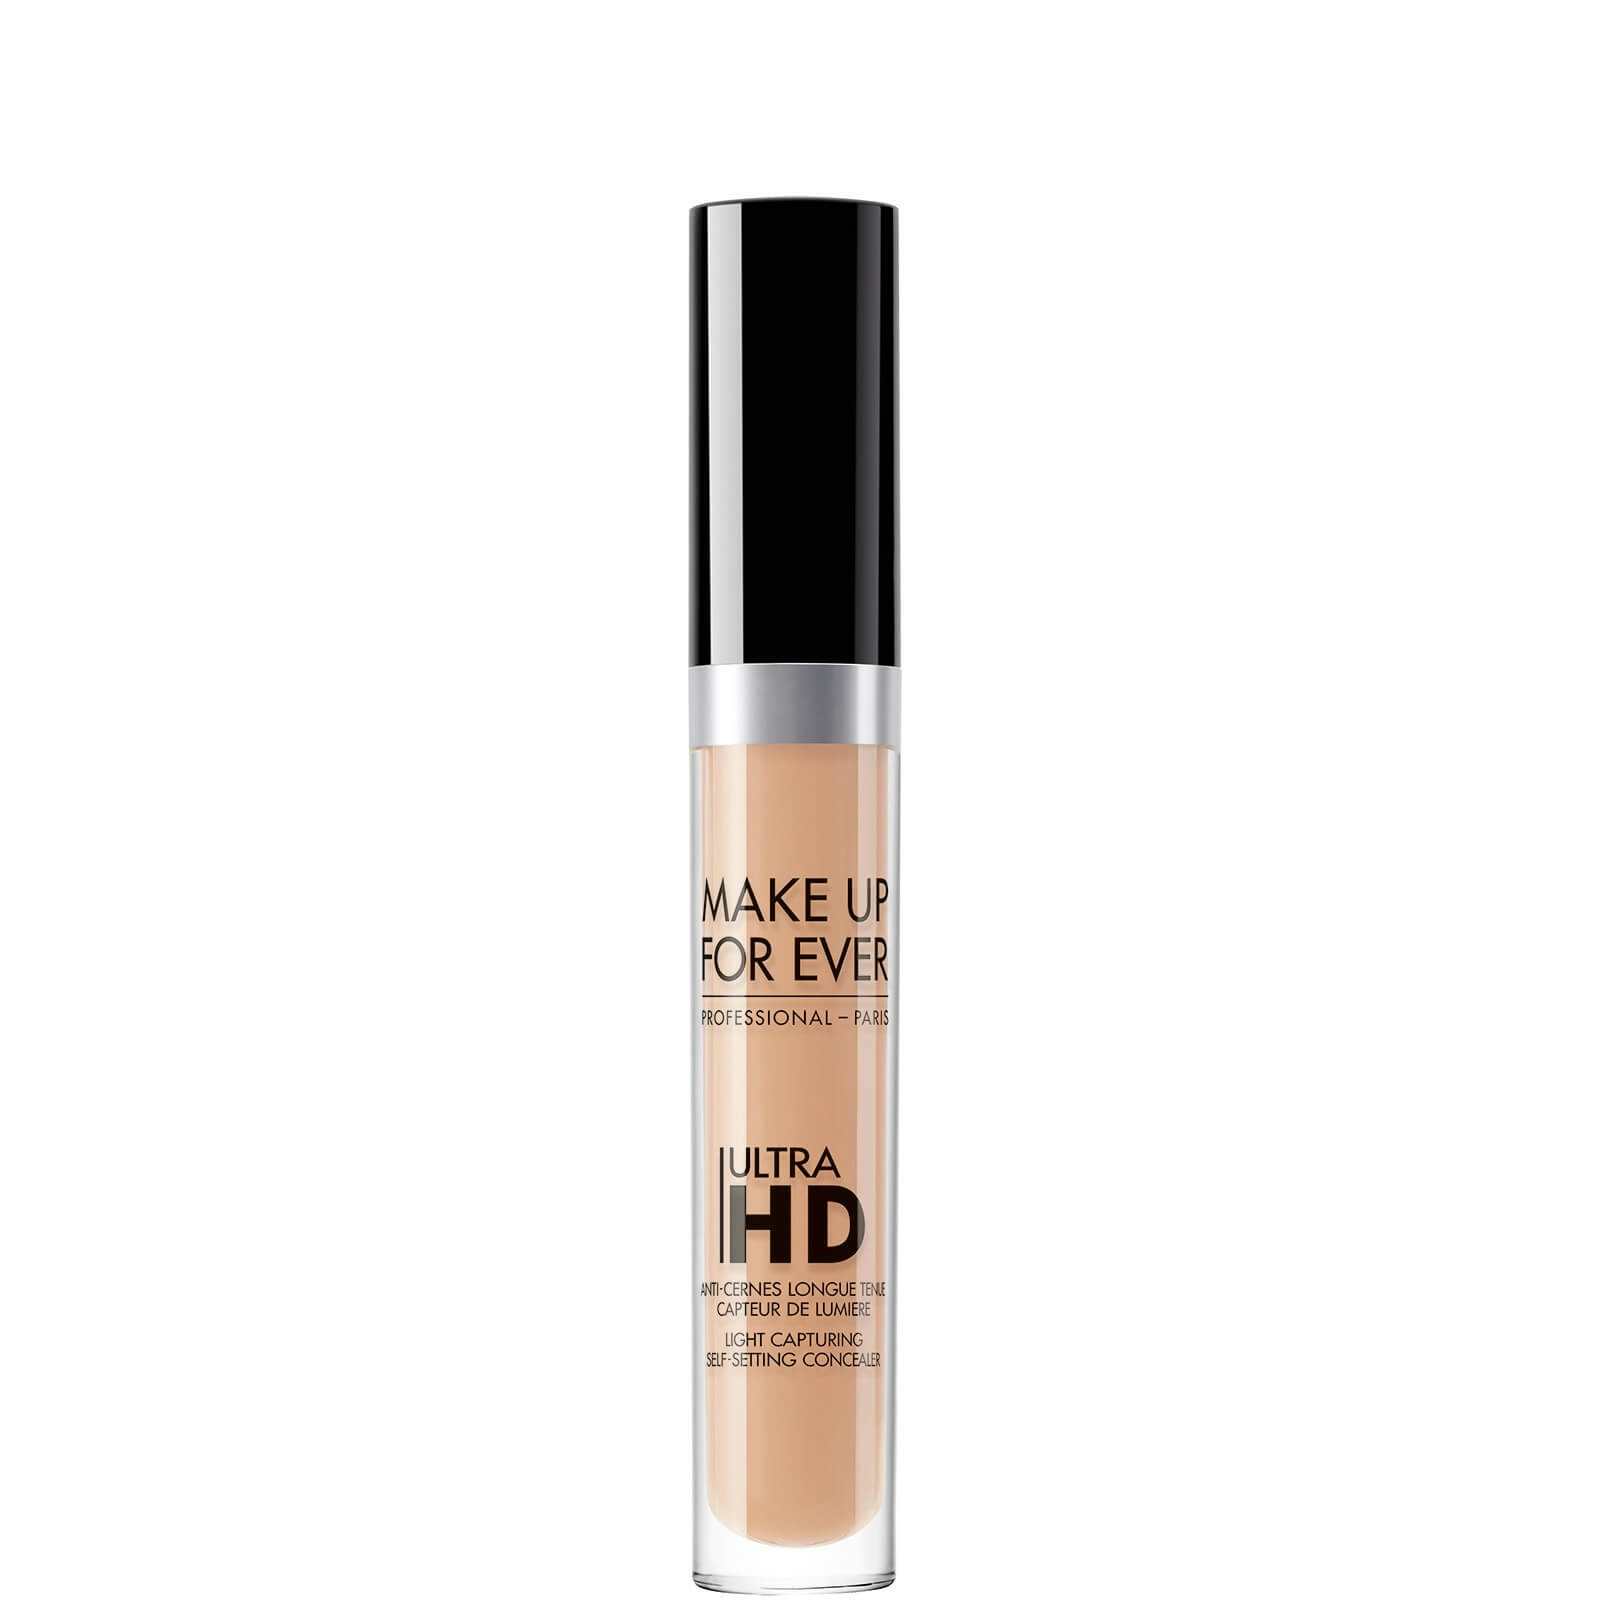 MAKE UP FOR EVER ultra Hd Self-Setting Concealer 5ml (Various Shades) - - 32 Neutral Beige